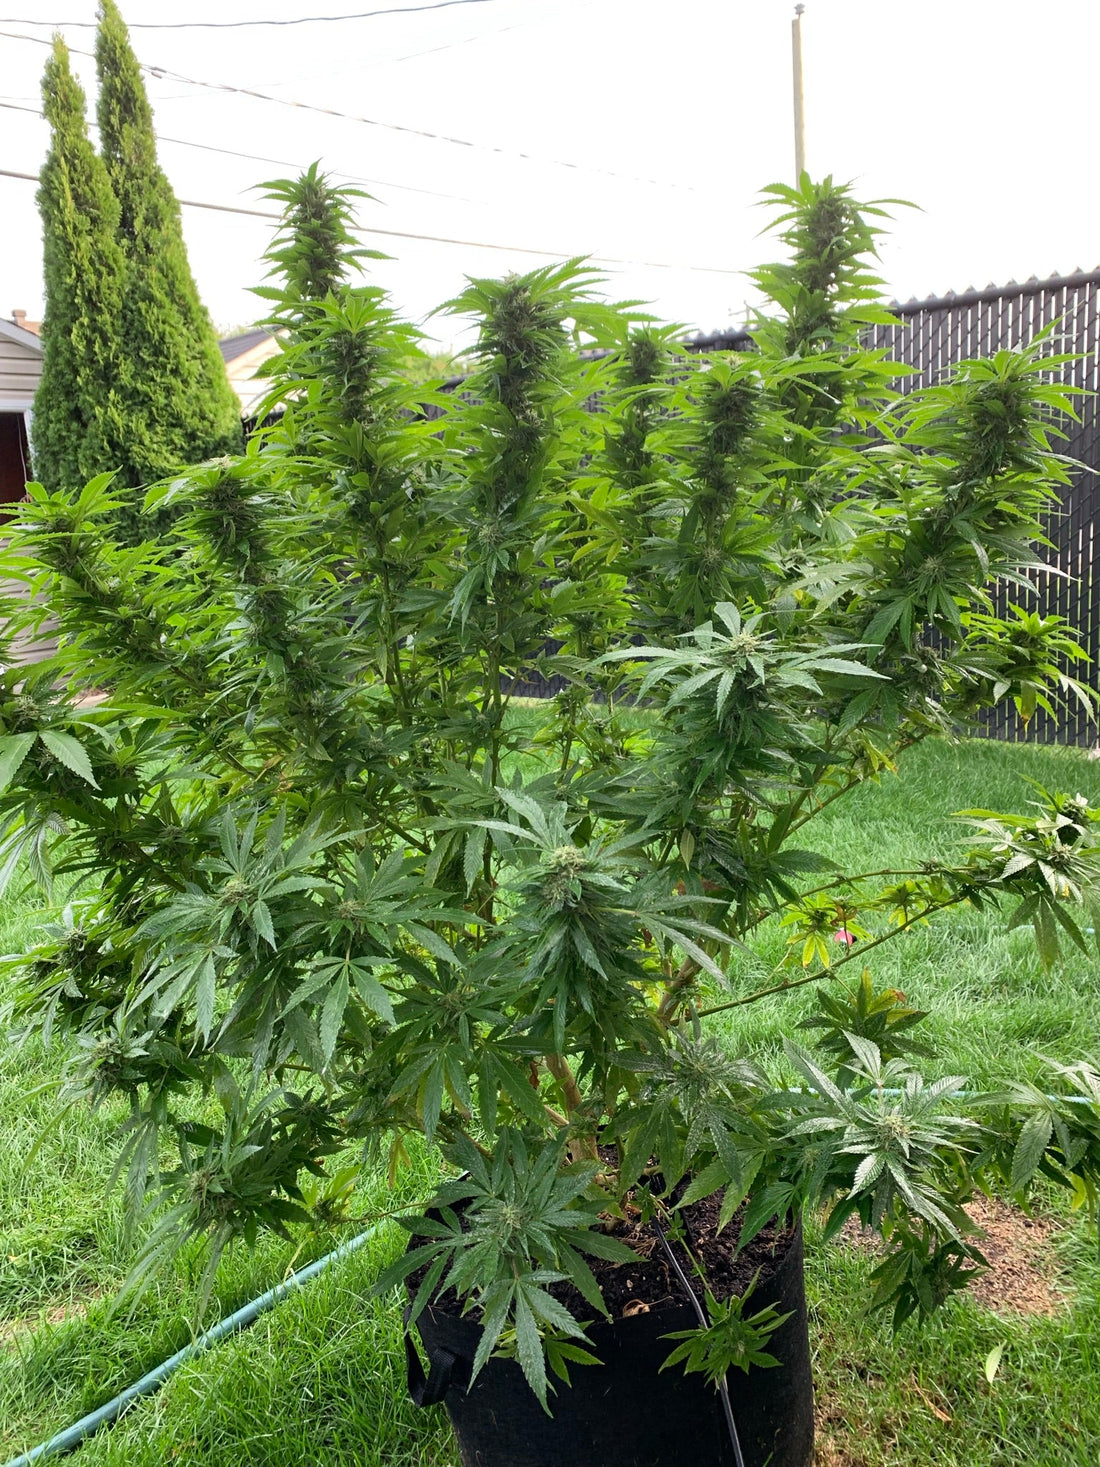 When is the best time to harvest your flower? - BudJuice